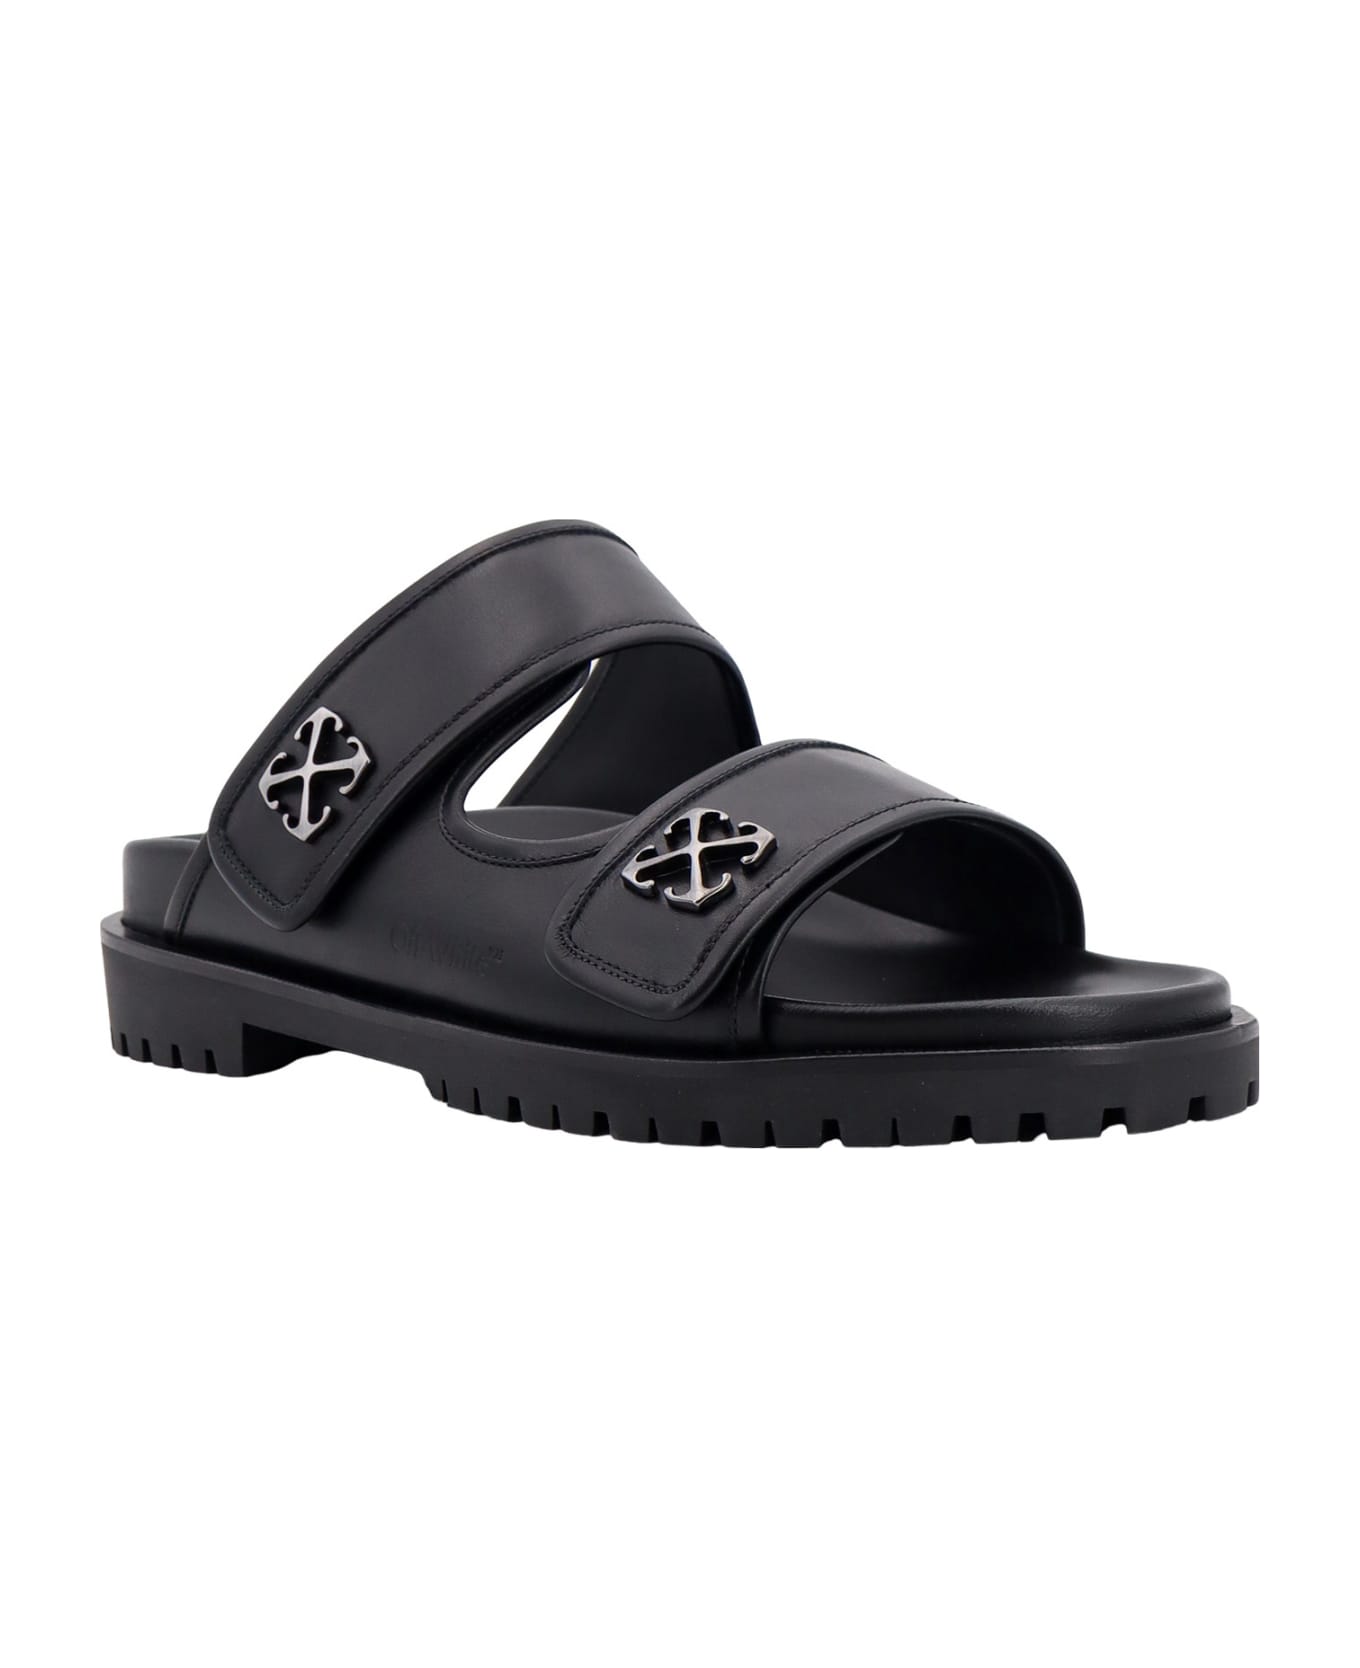 Off-White Sandals - Black Silv その他各種シューズ